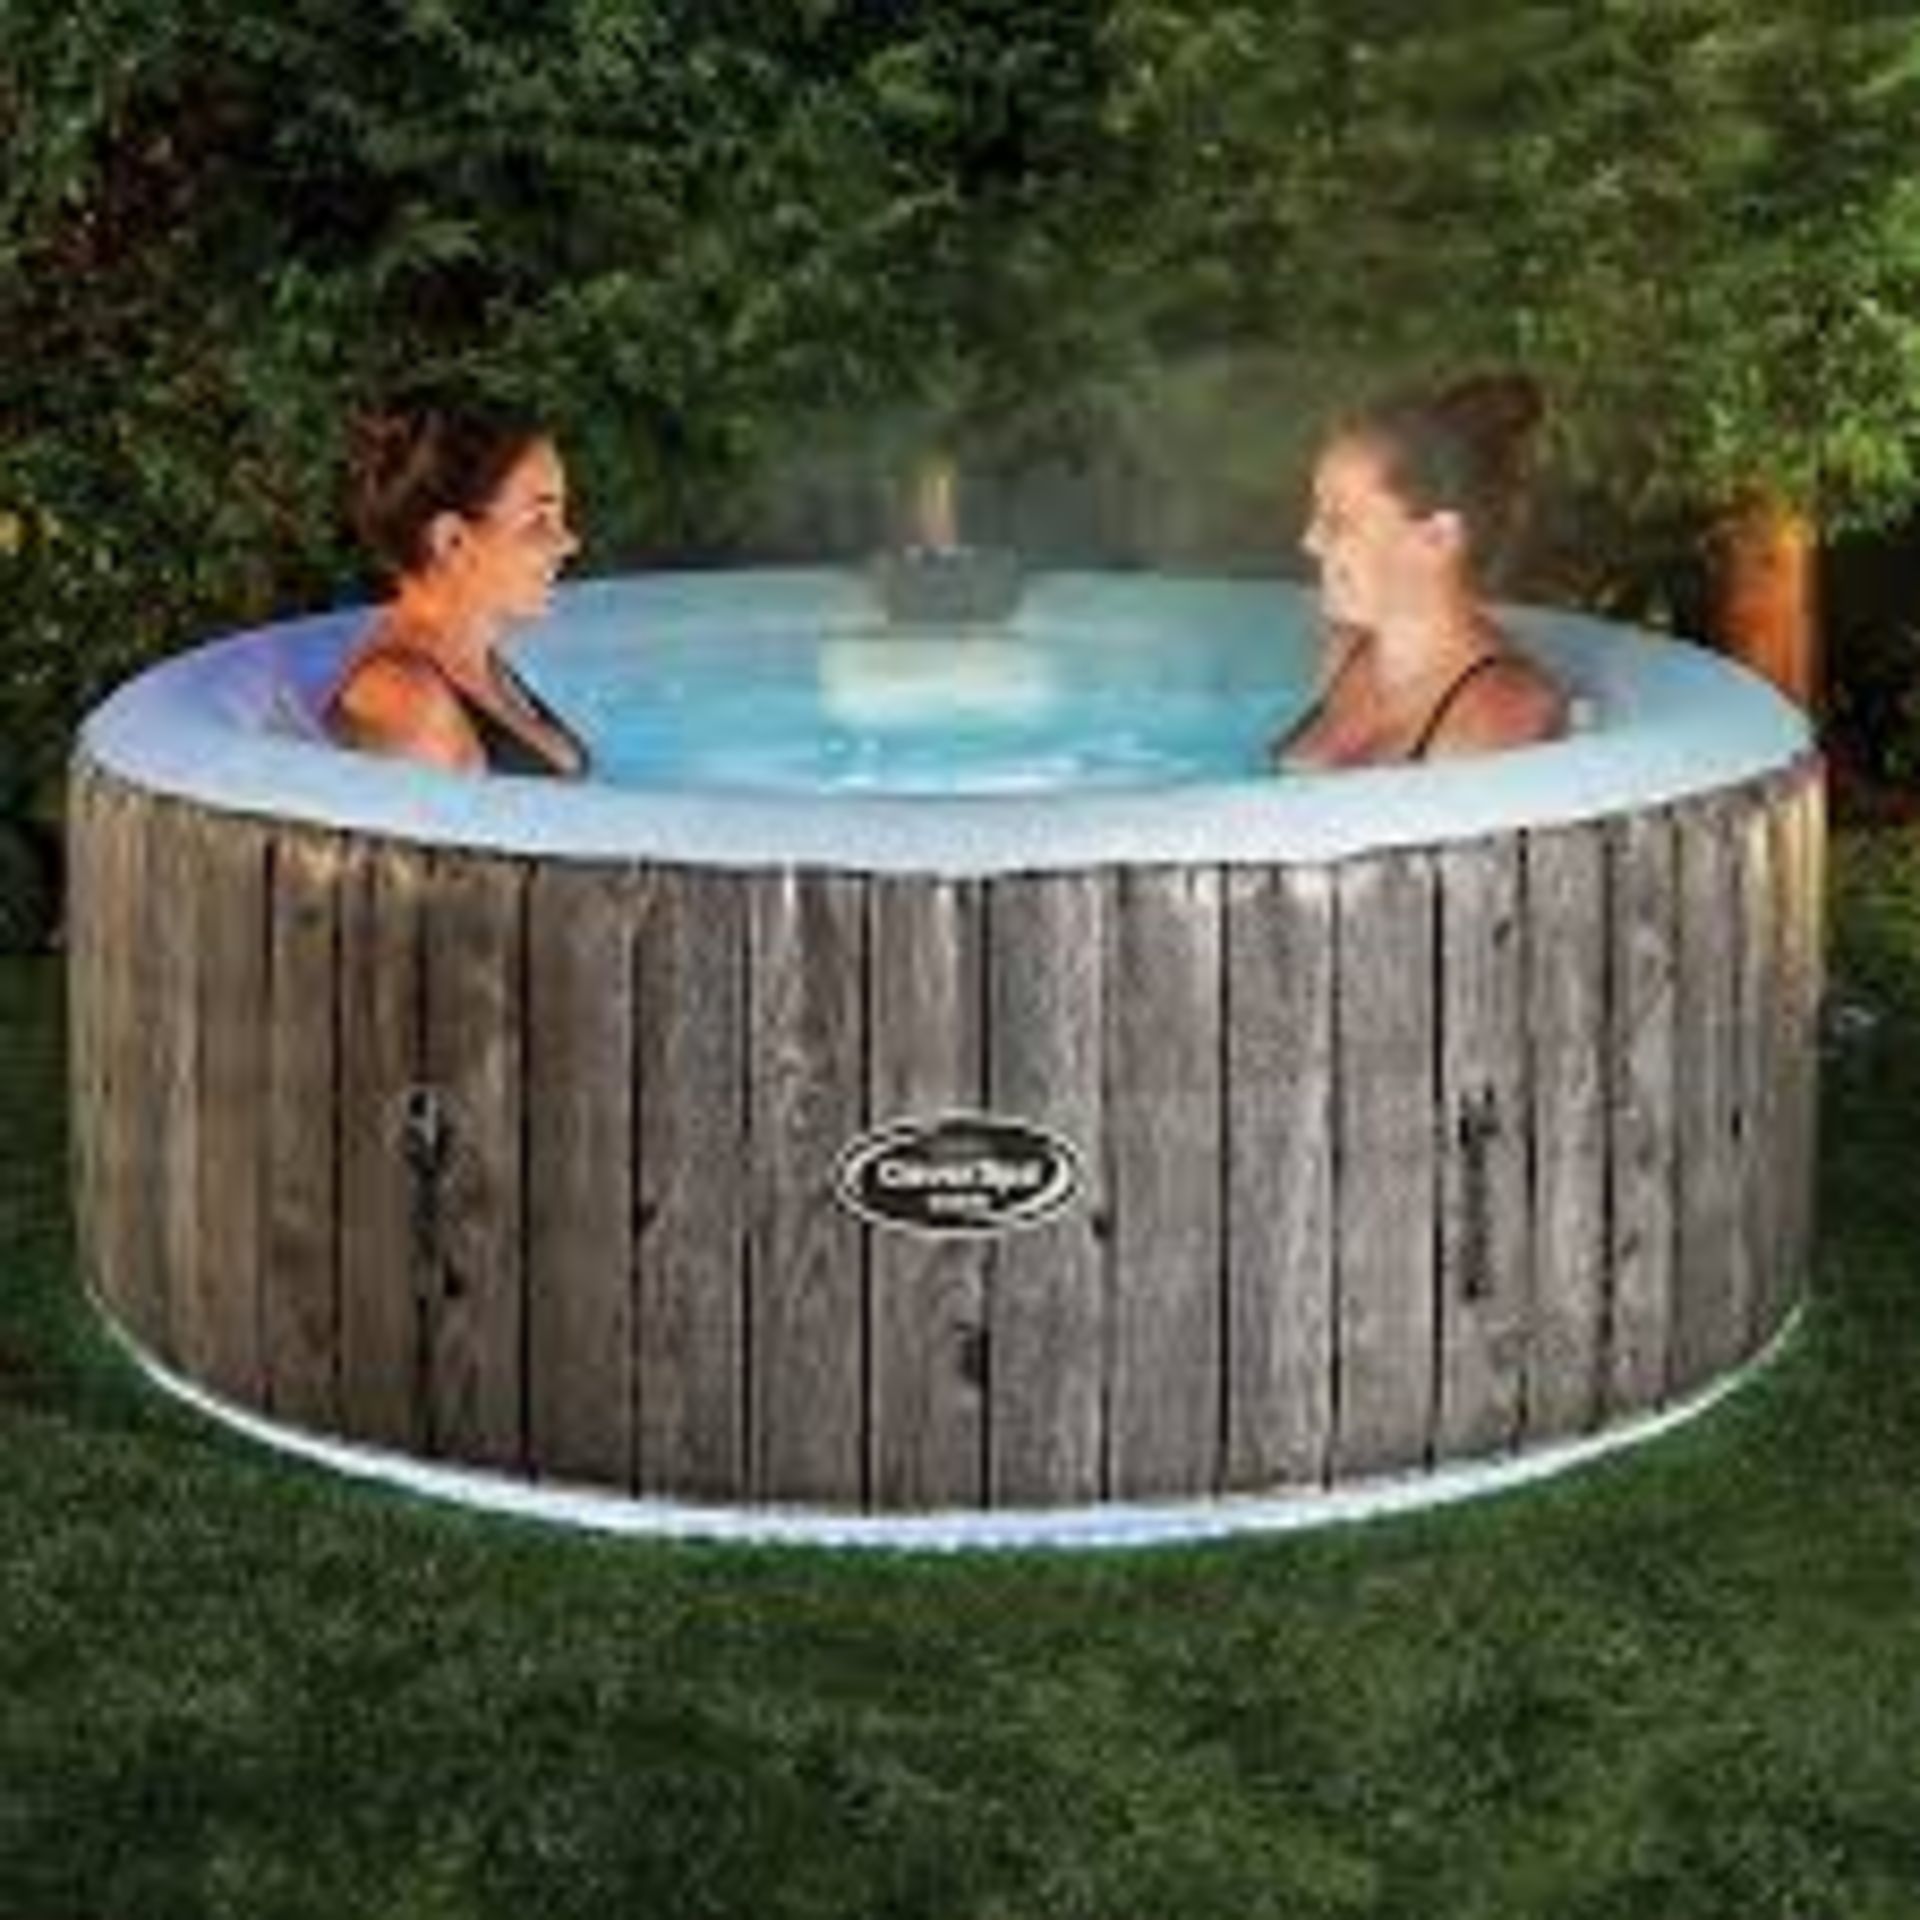 CleverSpa Waikiki Inflatable Hot Tub - Round 4 Person - 180cm. - R14.1.